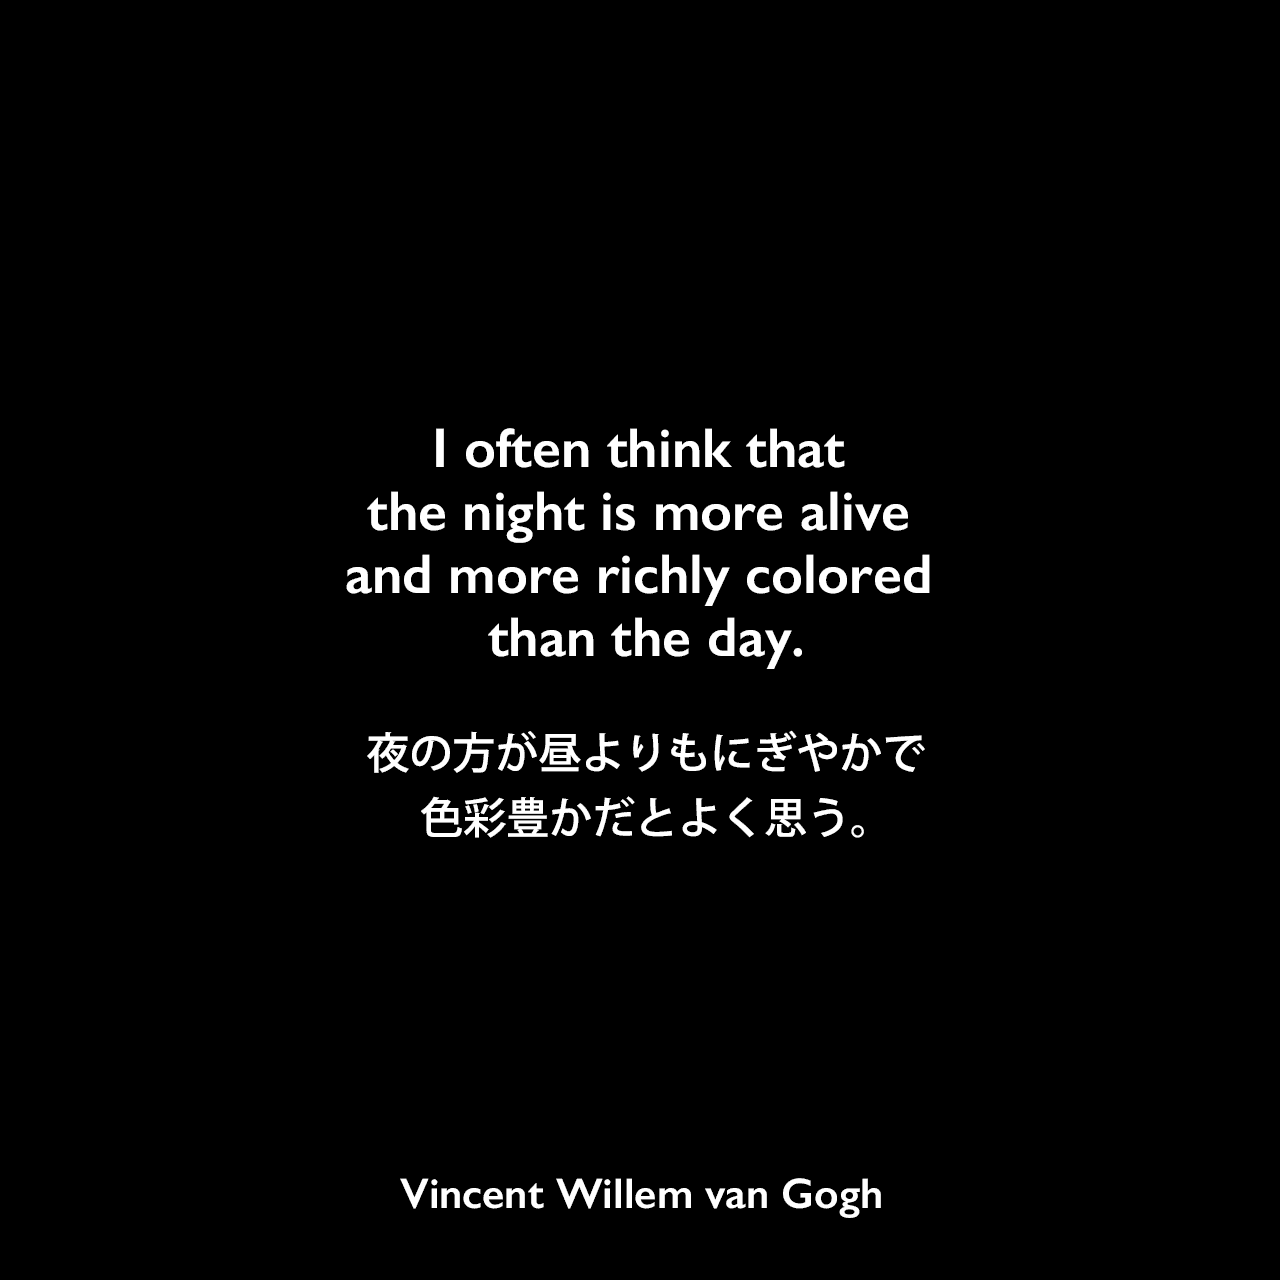 I often think that the night is more alive and more richly colored than the day.夜の方が昼よりもにぎやかで、色彩豊かだとよく思う。Vincent Willem van Gogh